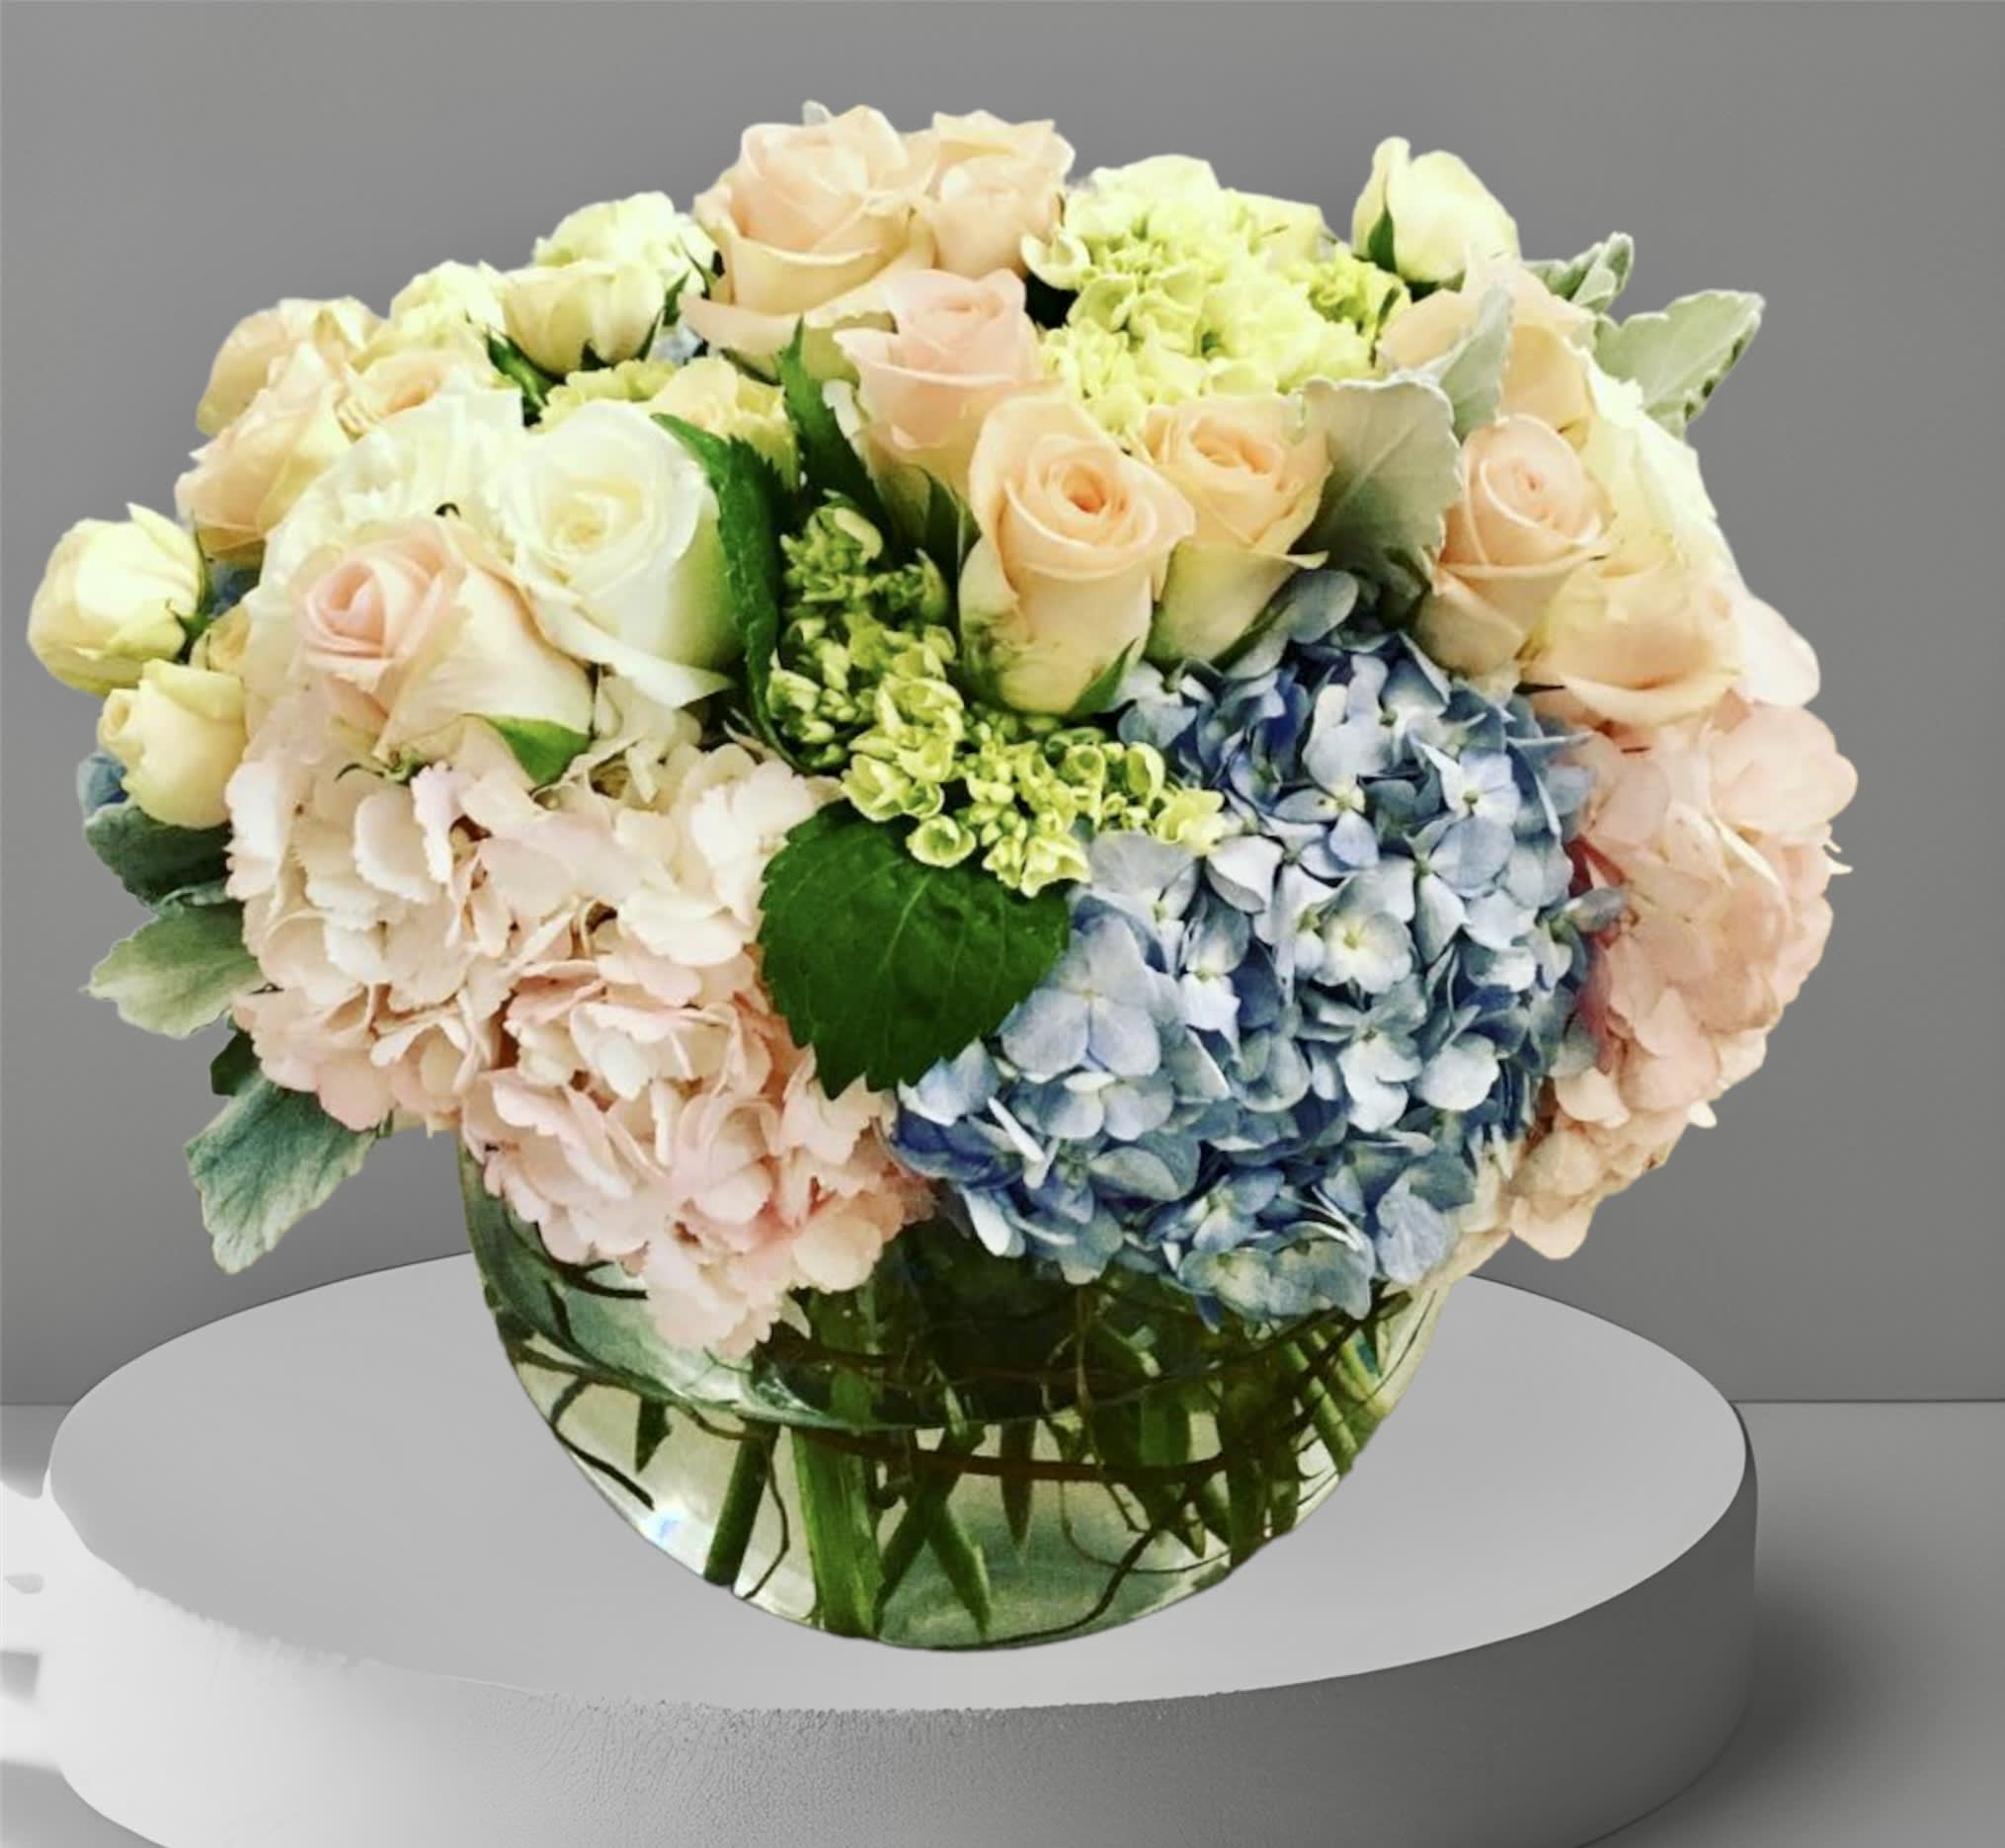 A Beautiful Bowl - A gorgeous mix of pastel hydrangea and roses with seasonal foliage arranged is a large glass bowl. Perfect as a welcome baby gift, thank you gift, or just because.